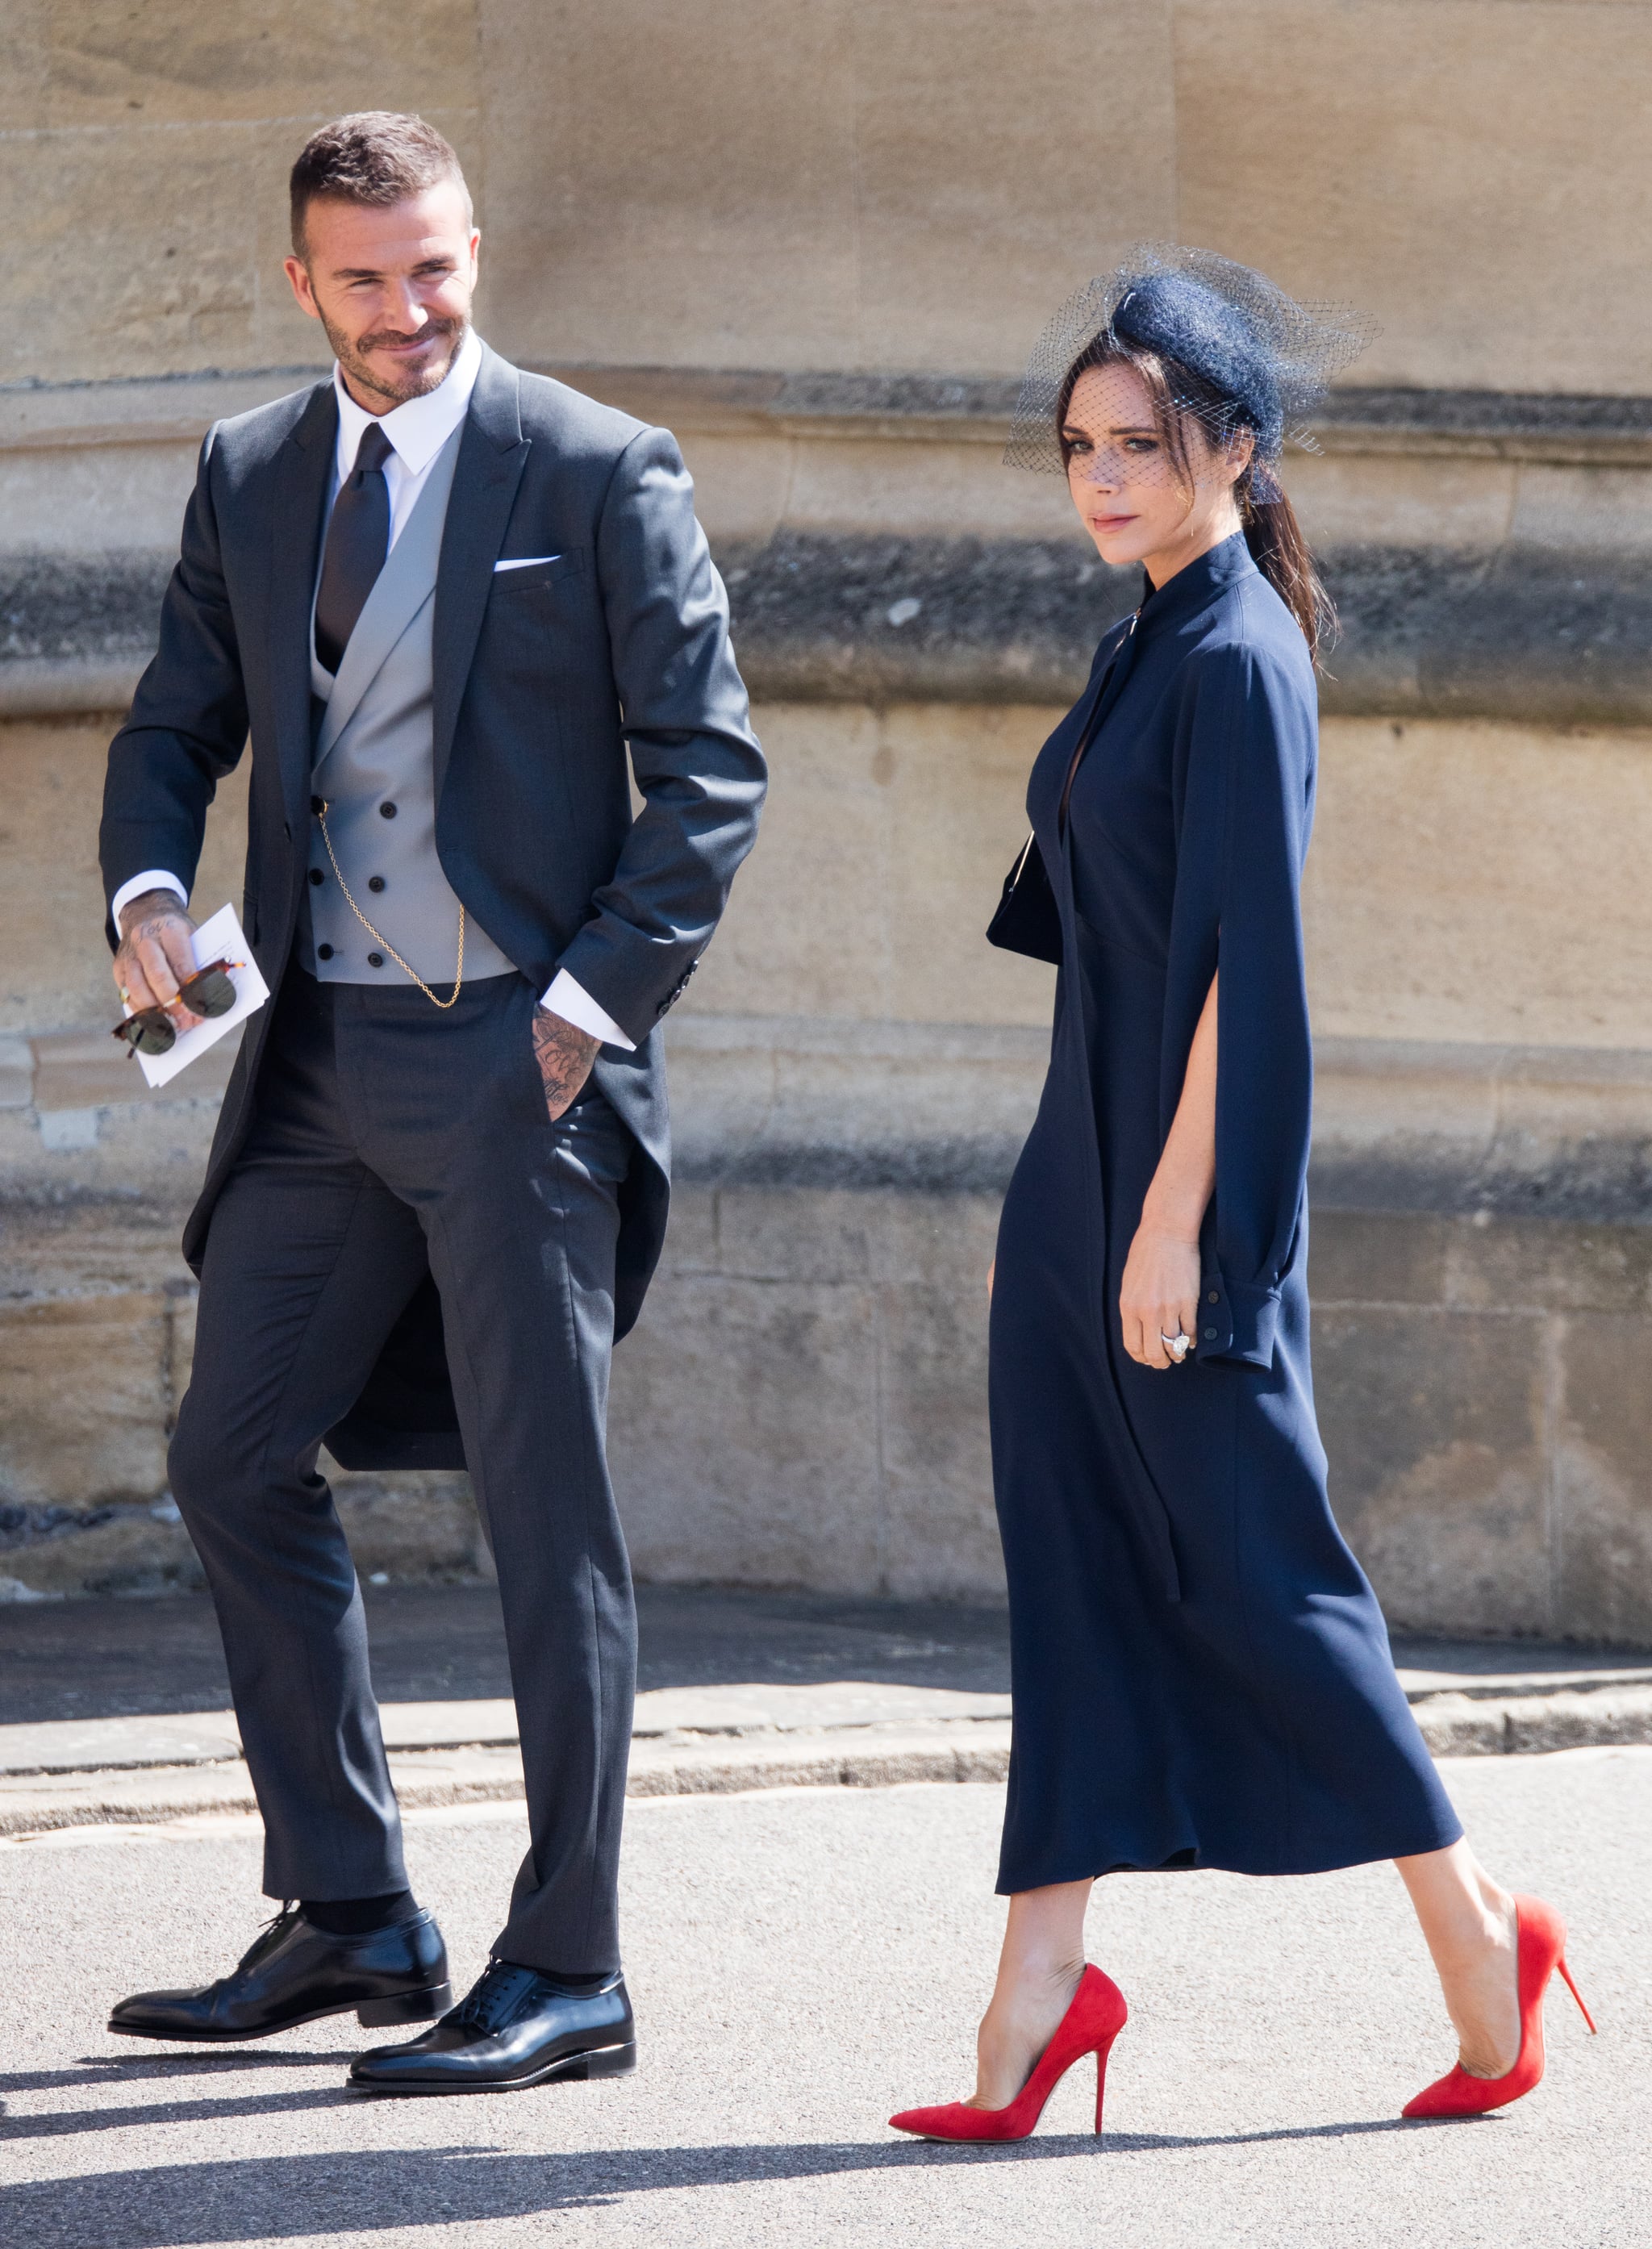 Fashion, Shopping & Style | Victoria and David Beckham Are Giving Away  Their Royal Wedding Outfits For an Important Cause | POPSUGAR Fashion Photo  25